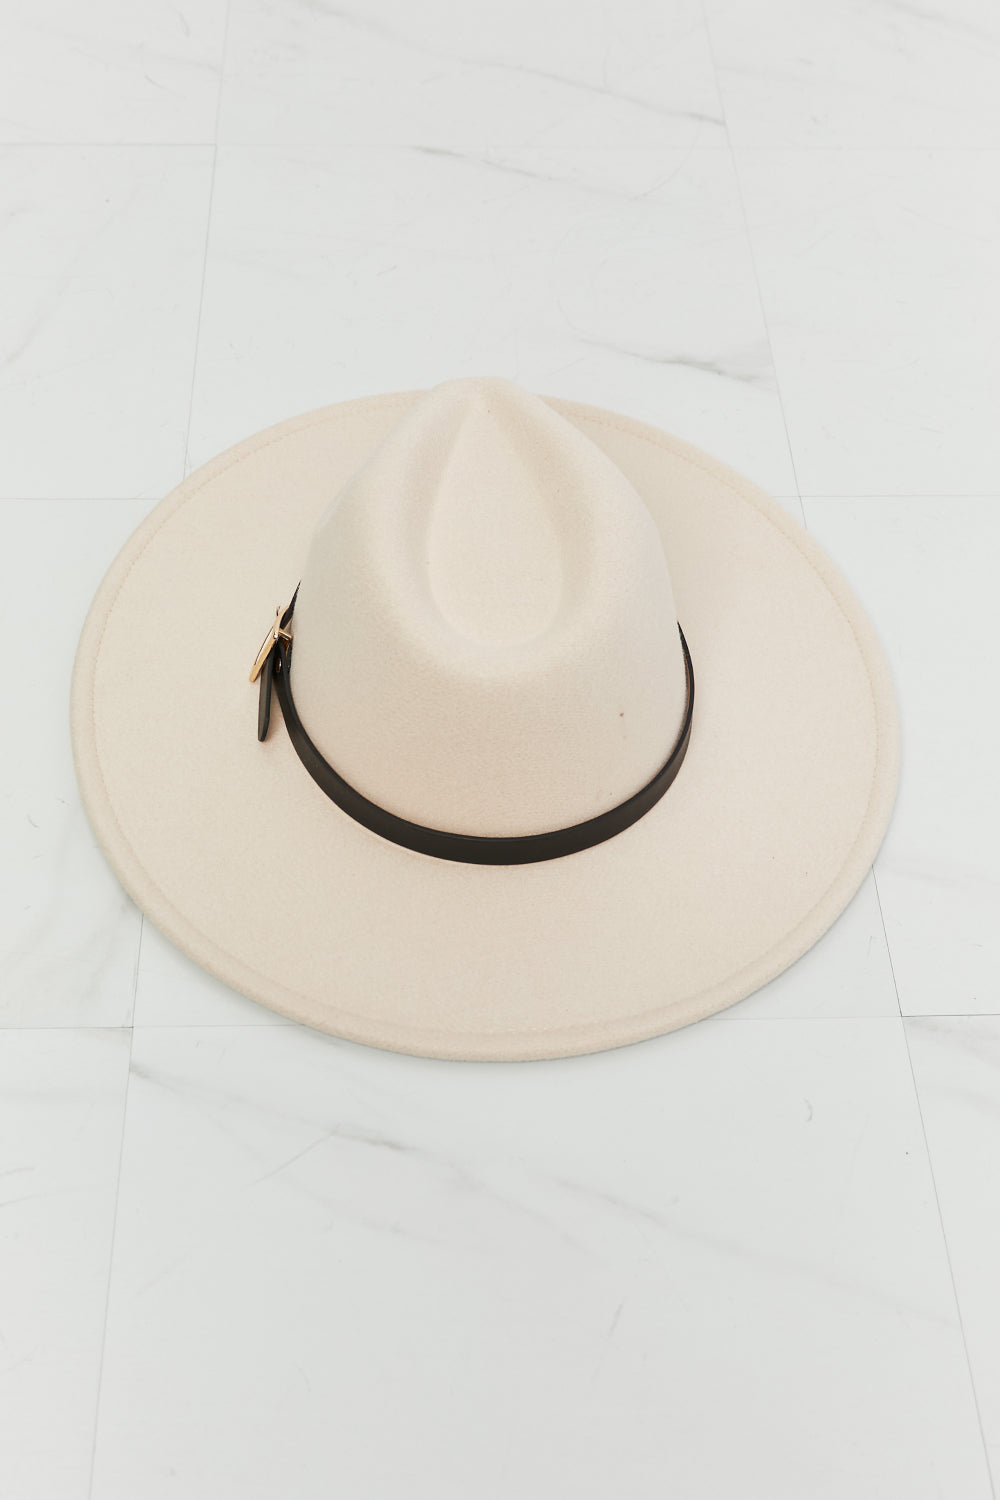 Fame Accessories Ride Along Fedora Hat